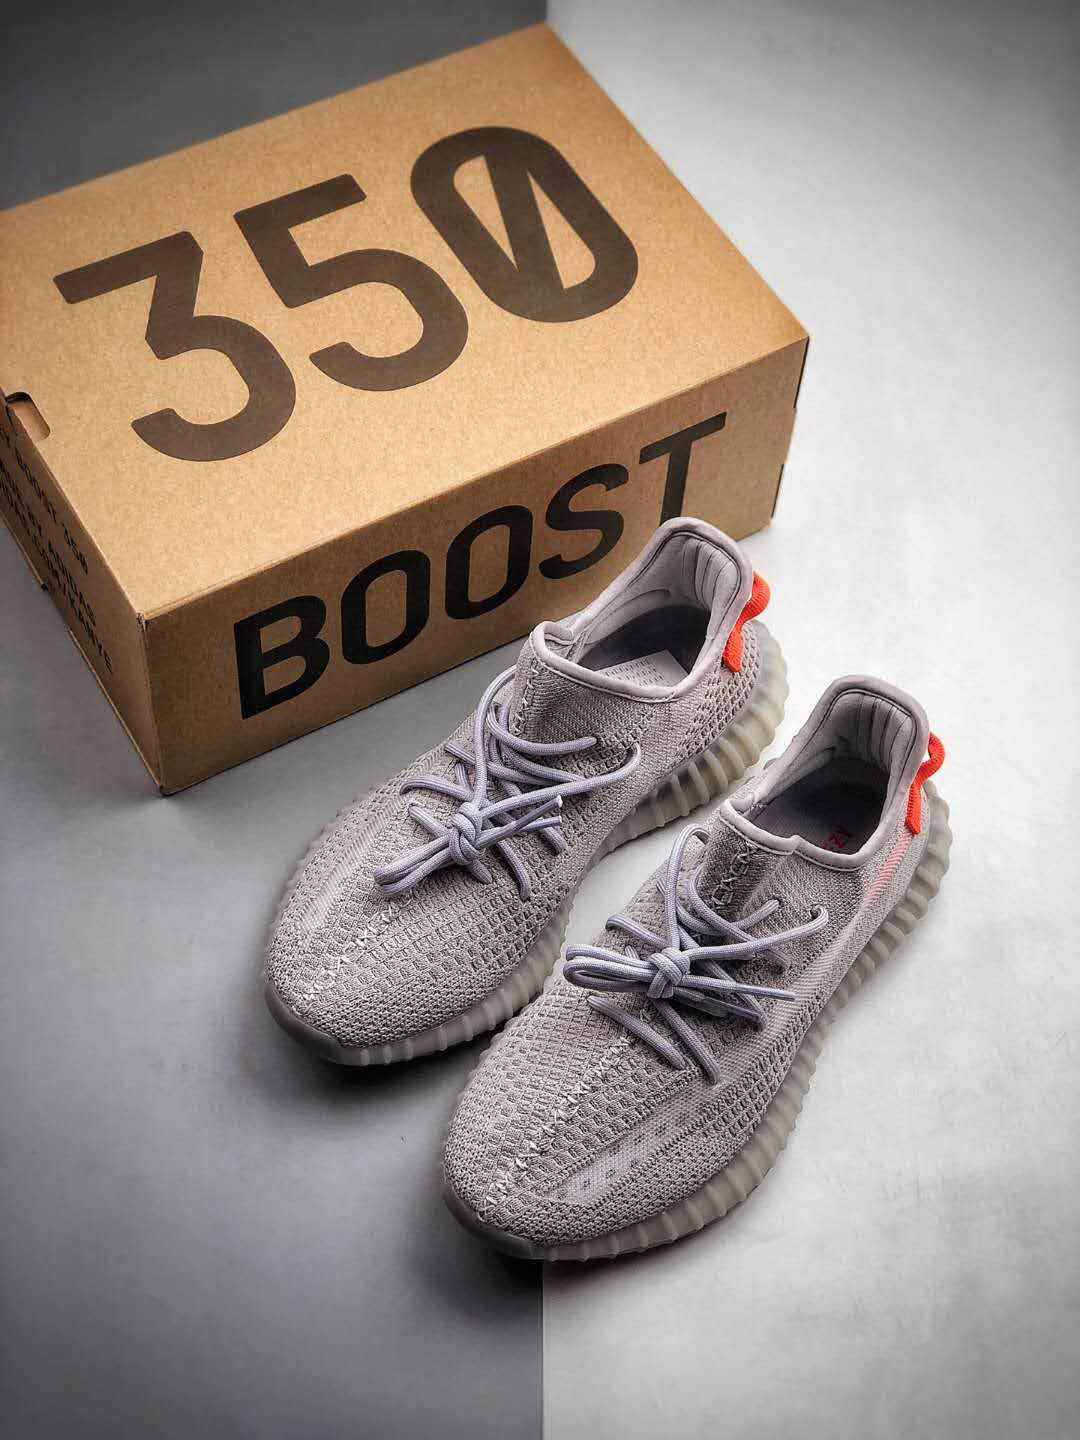 Adidas Yeezy Boost 350 V2 Tail Light FX9017 - Authentic Sneakers for Style and Comfort